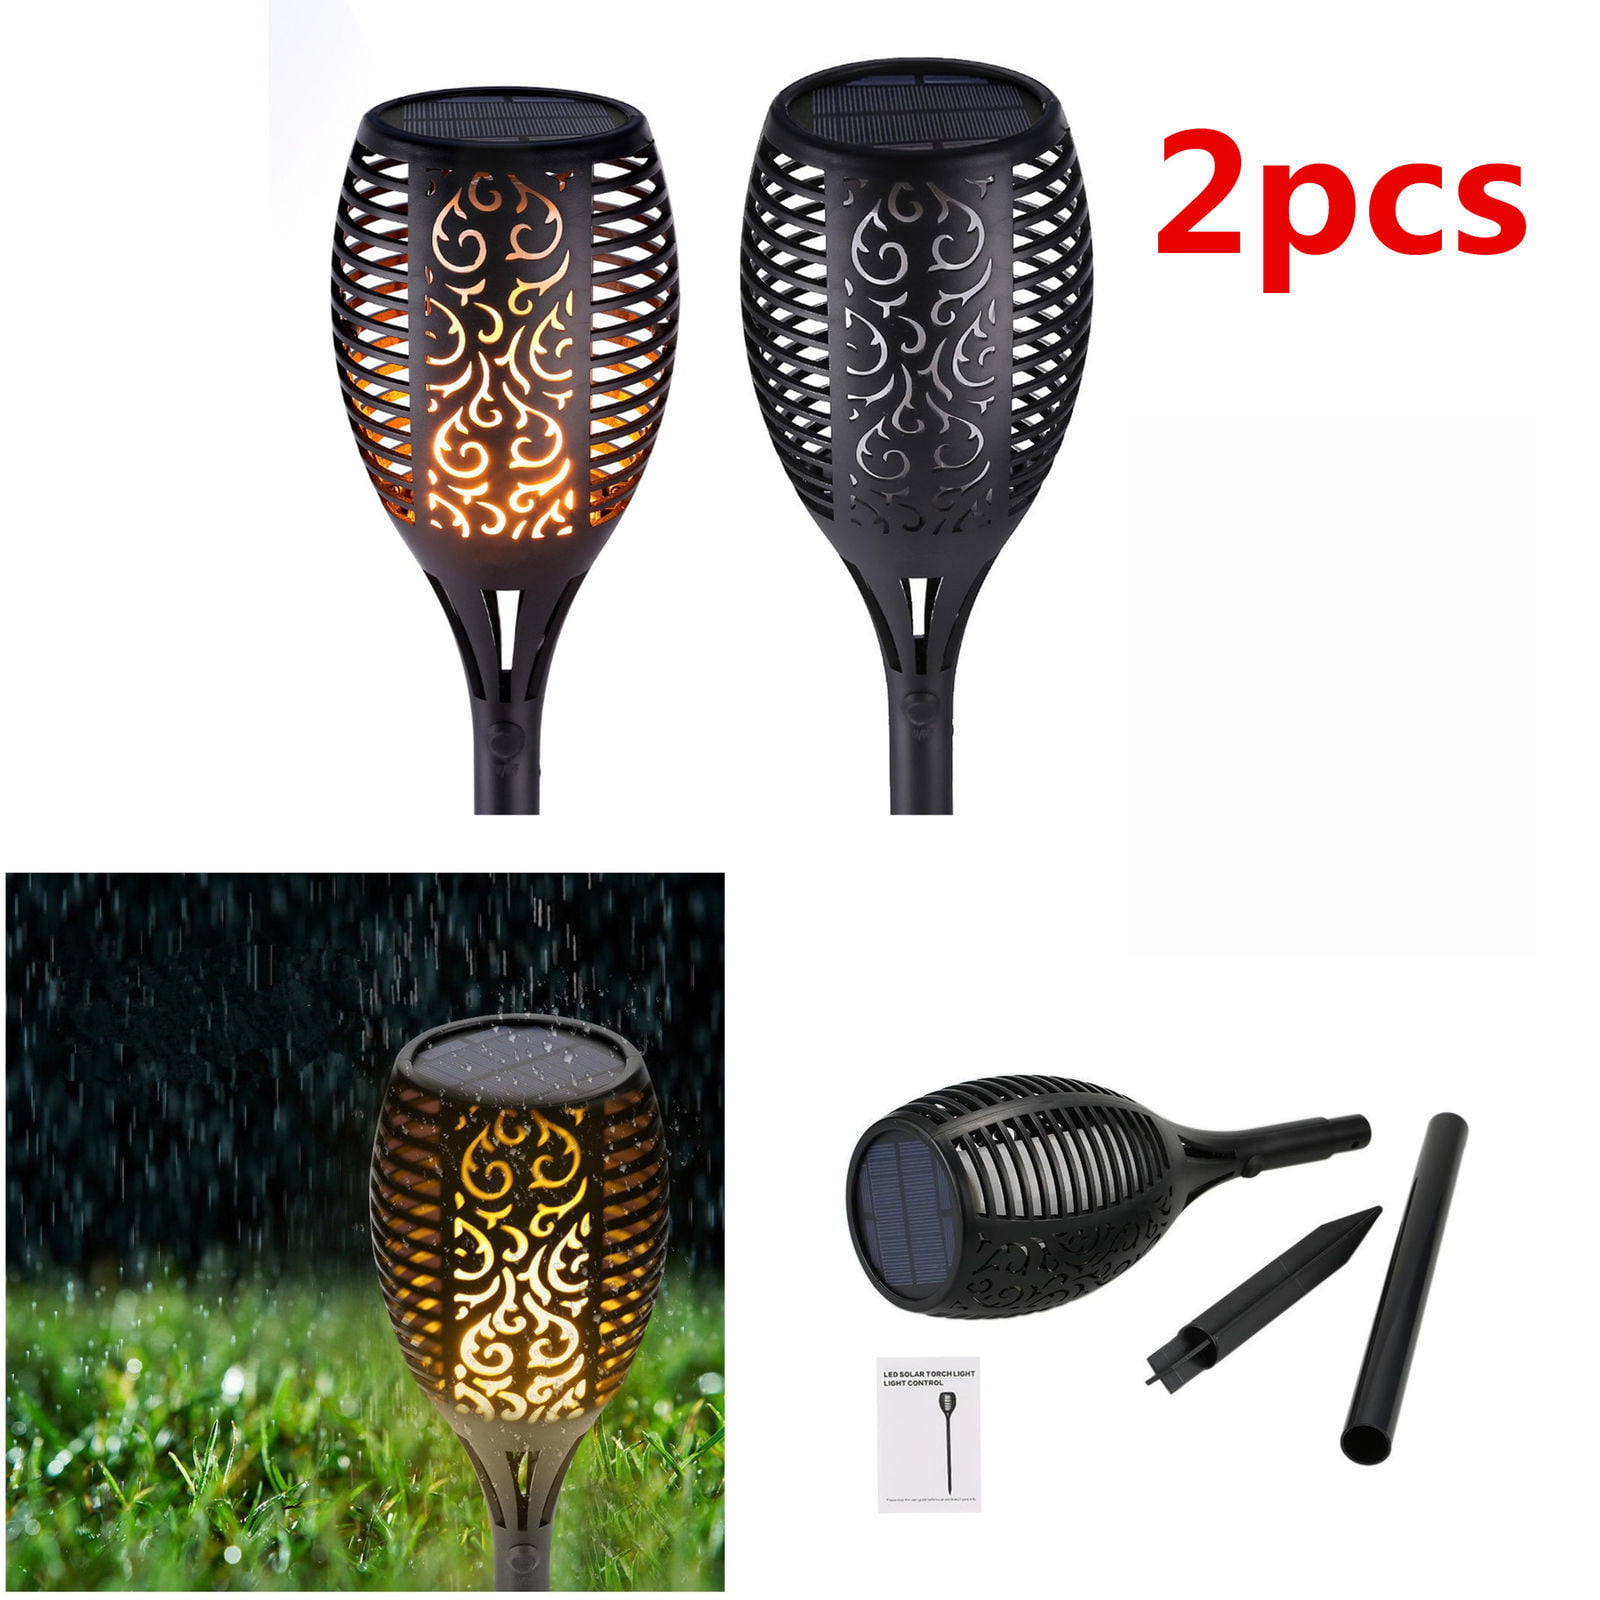 IP65 Waterproof Flickering Flame Light 2 Pack TWZ Solar Garden Lights 96 LED Solar Powered Torch Light Pathway Lighting Dusk to Dawn Auto On/Off 